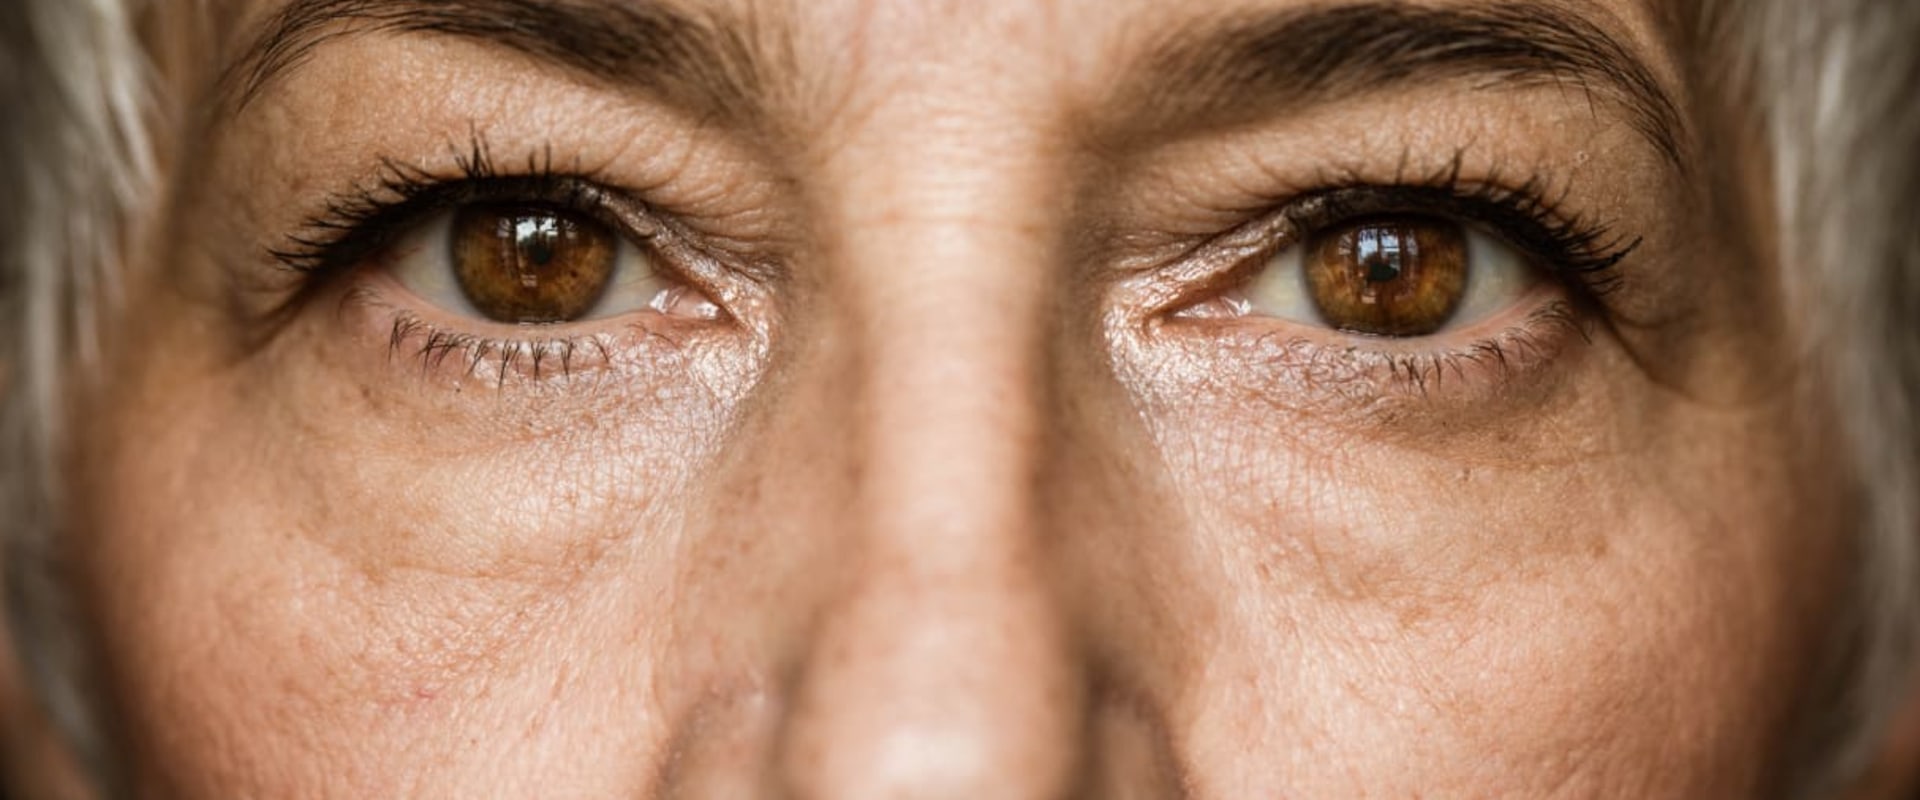 Will Cataract Surgery Improve My Vision? - An Expert's Perspective